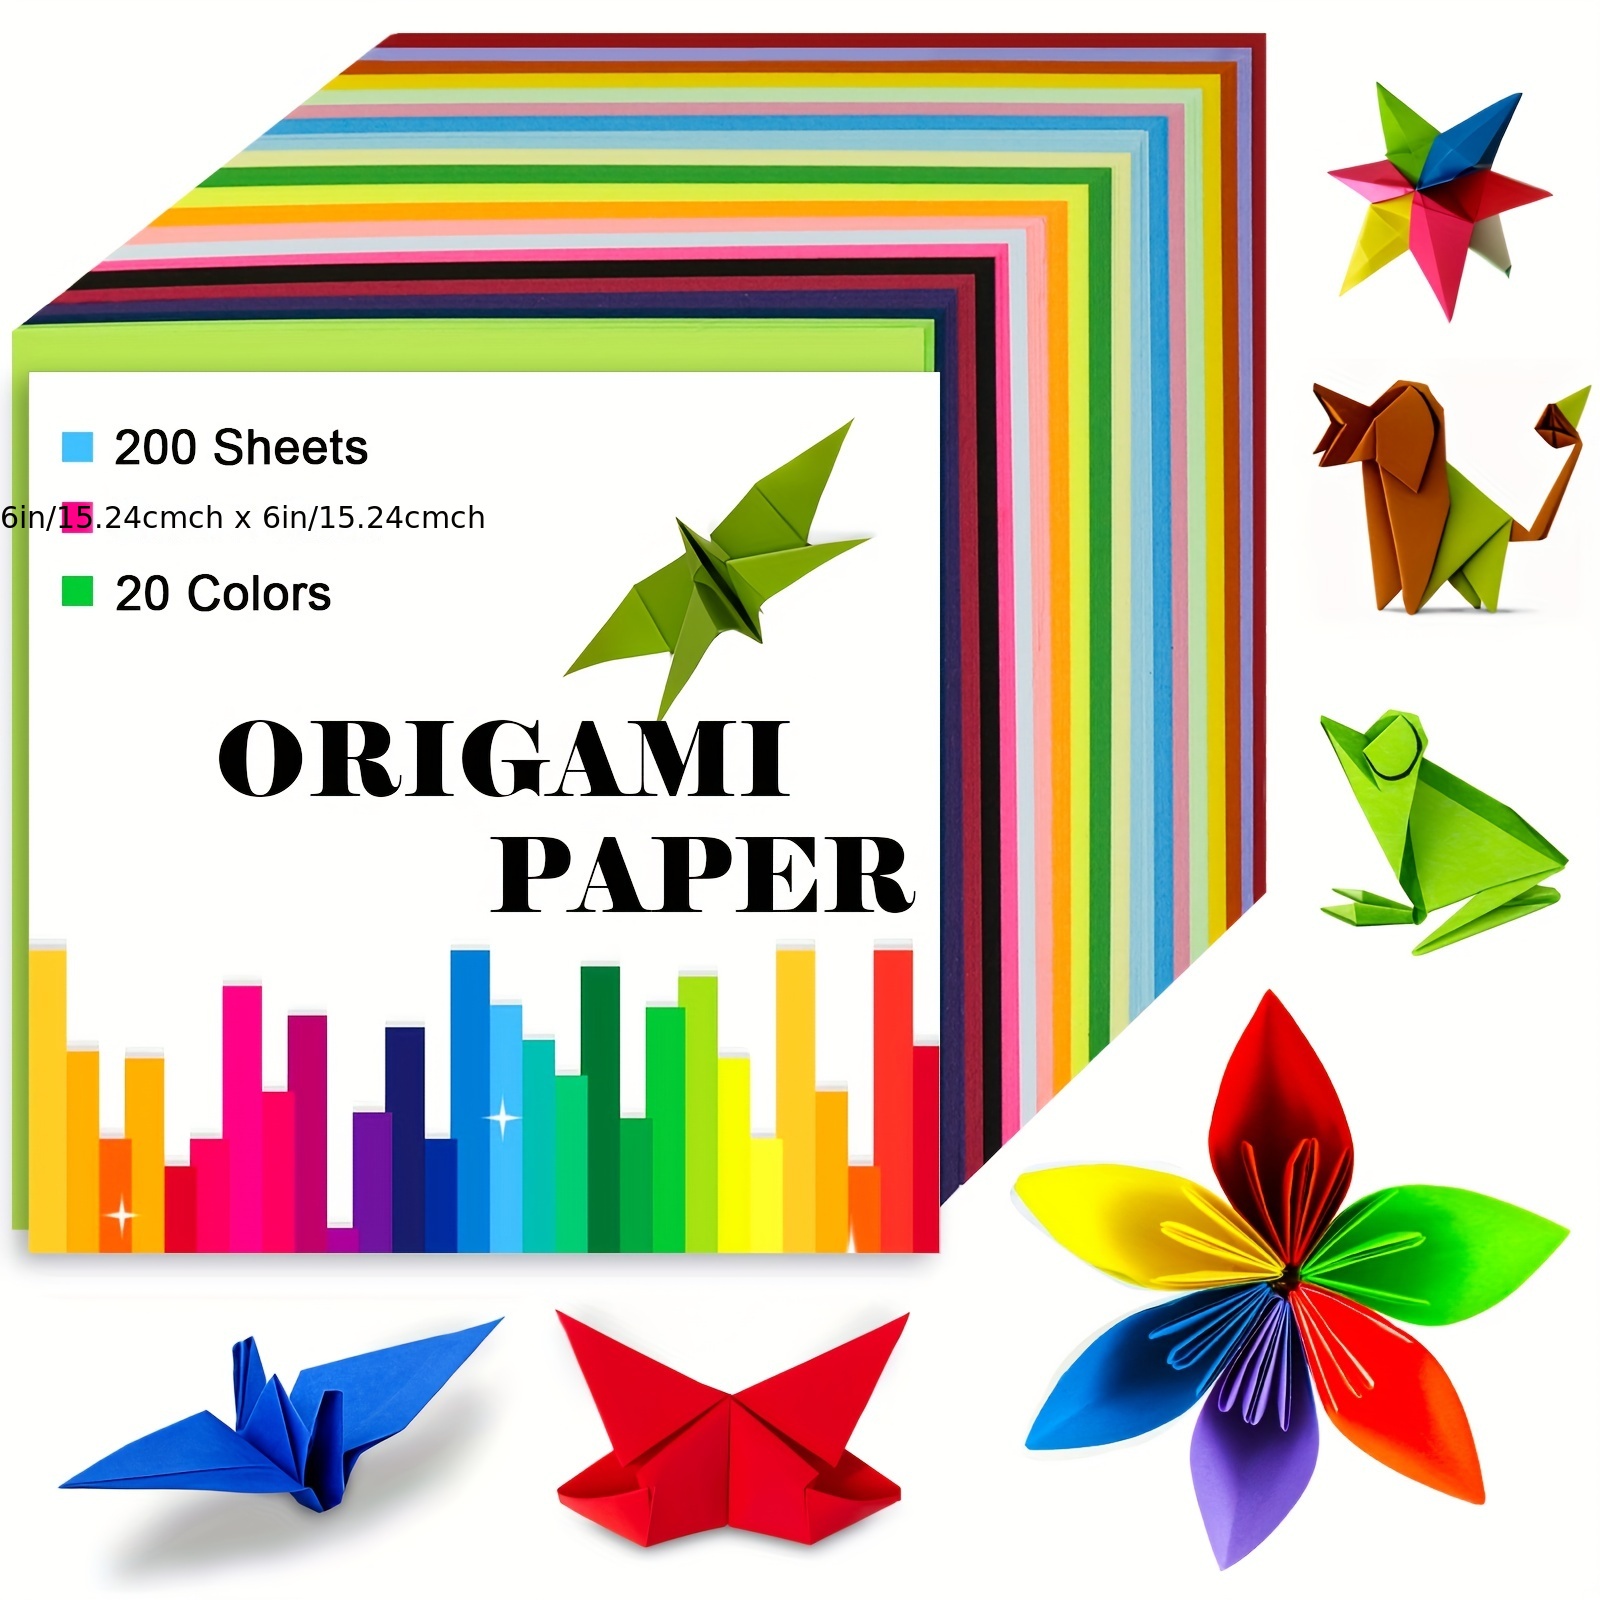 Origami Paper Kit for Kids - 152 Sheets 6 inch Double Sided Origami with Instructional Origami Book - 72 Patterns Folding Papers Educational Toy for